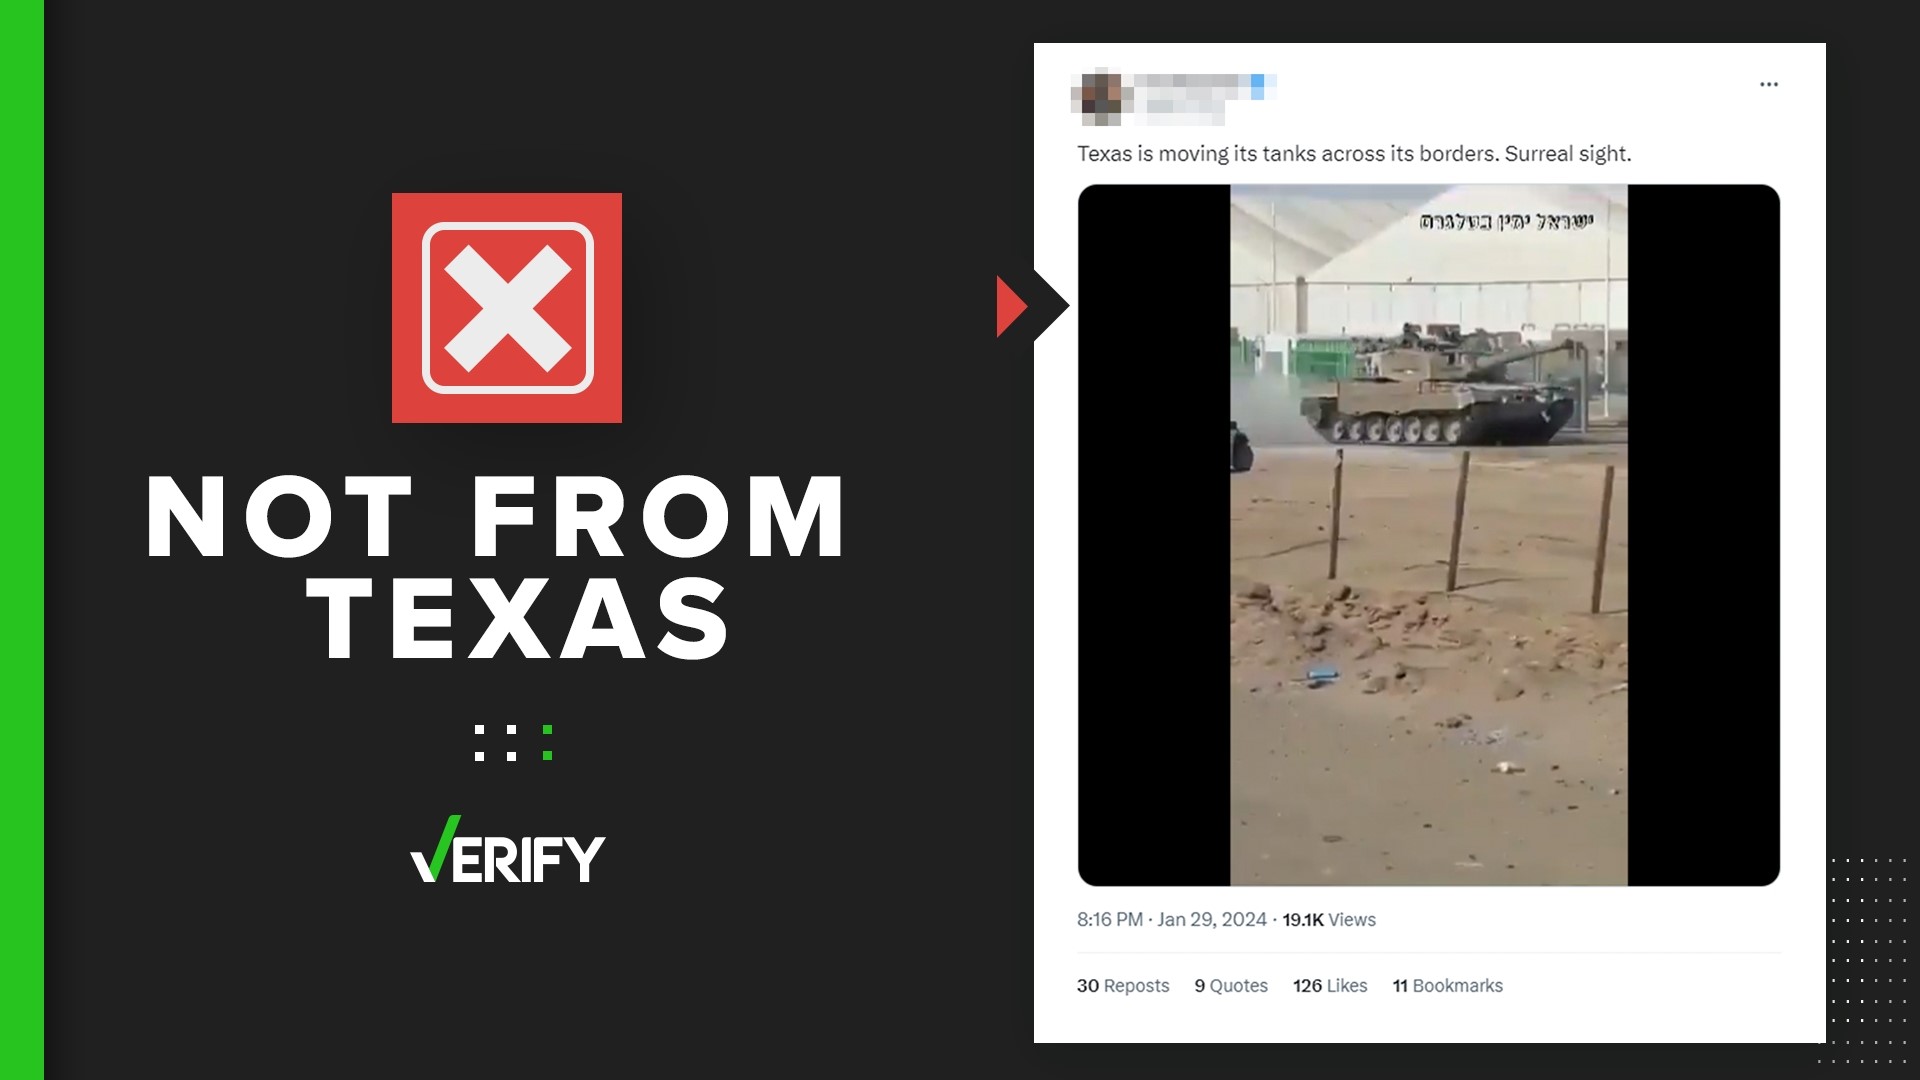 Online posts falsely claim a video shows tanks in Texas amid the state’s border clash with the Biden administration. The video was actually taken in Chile.